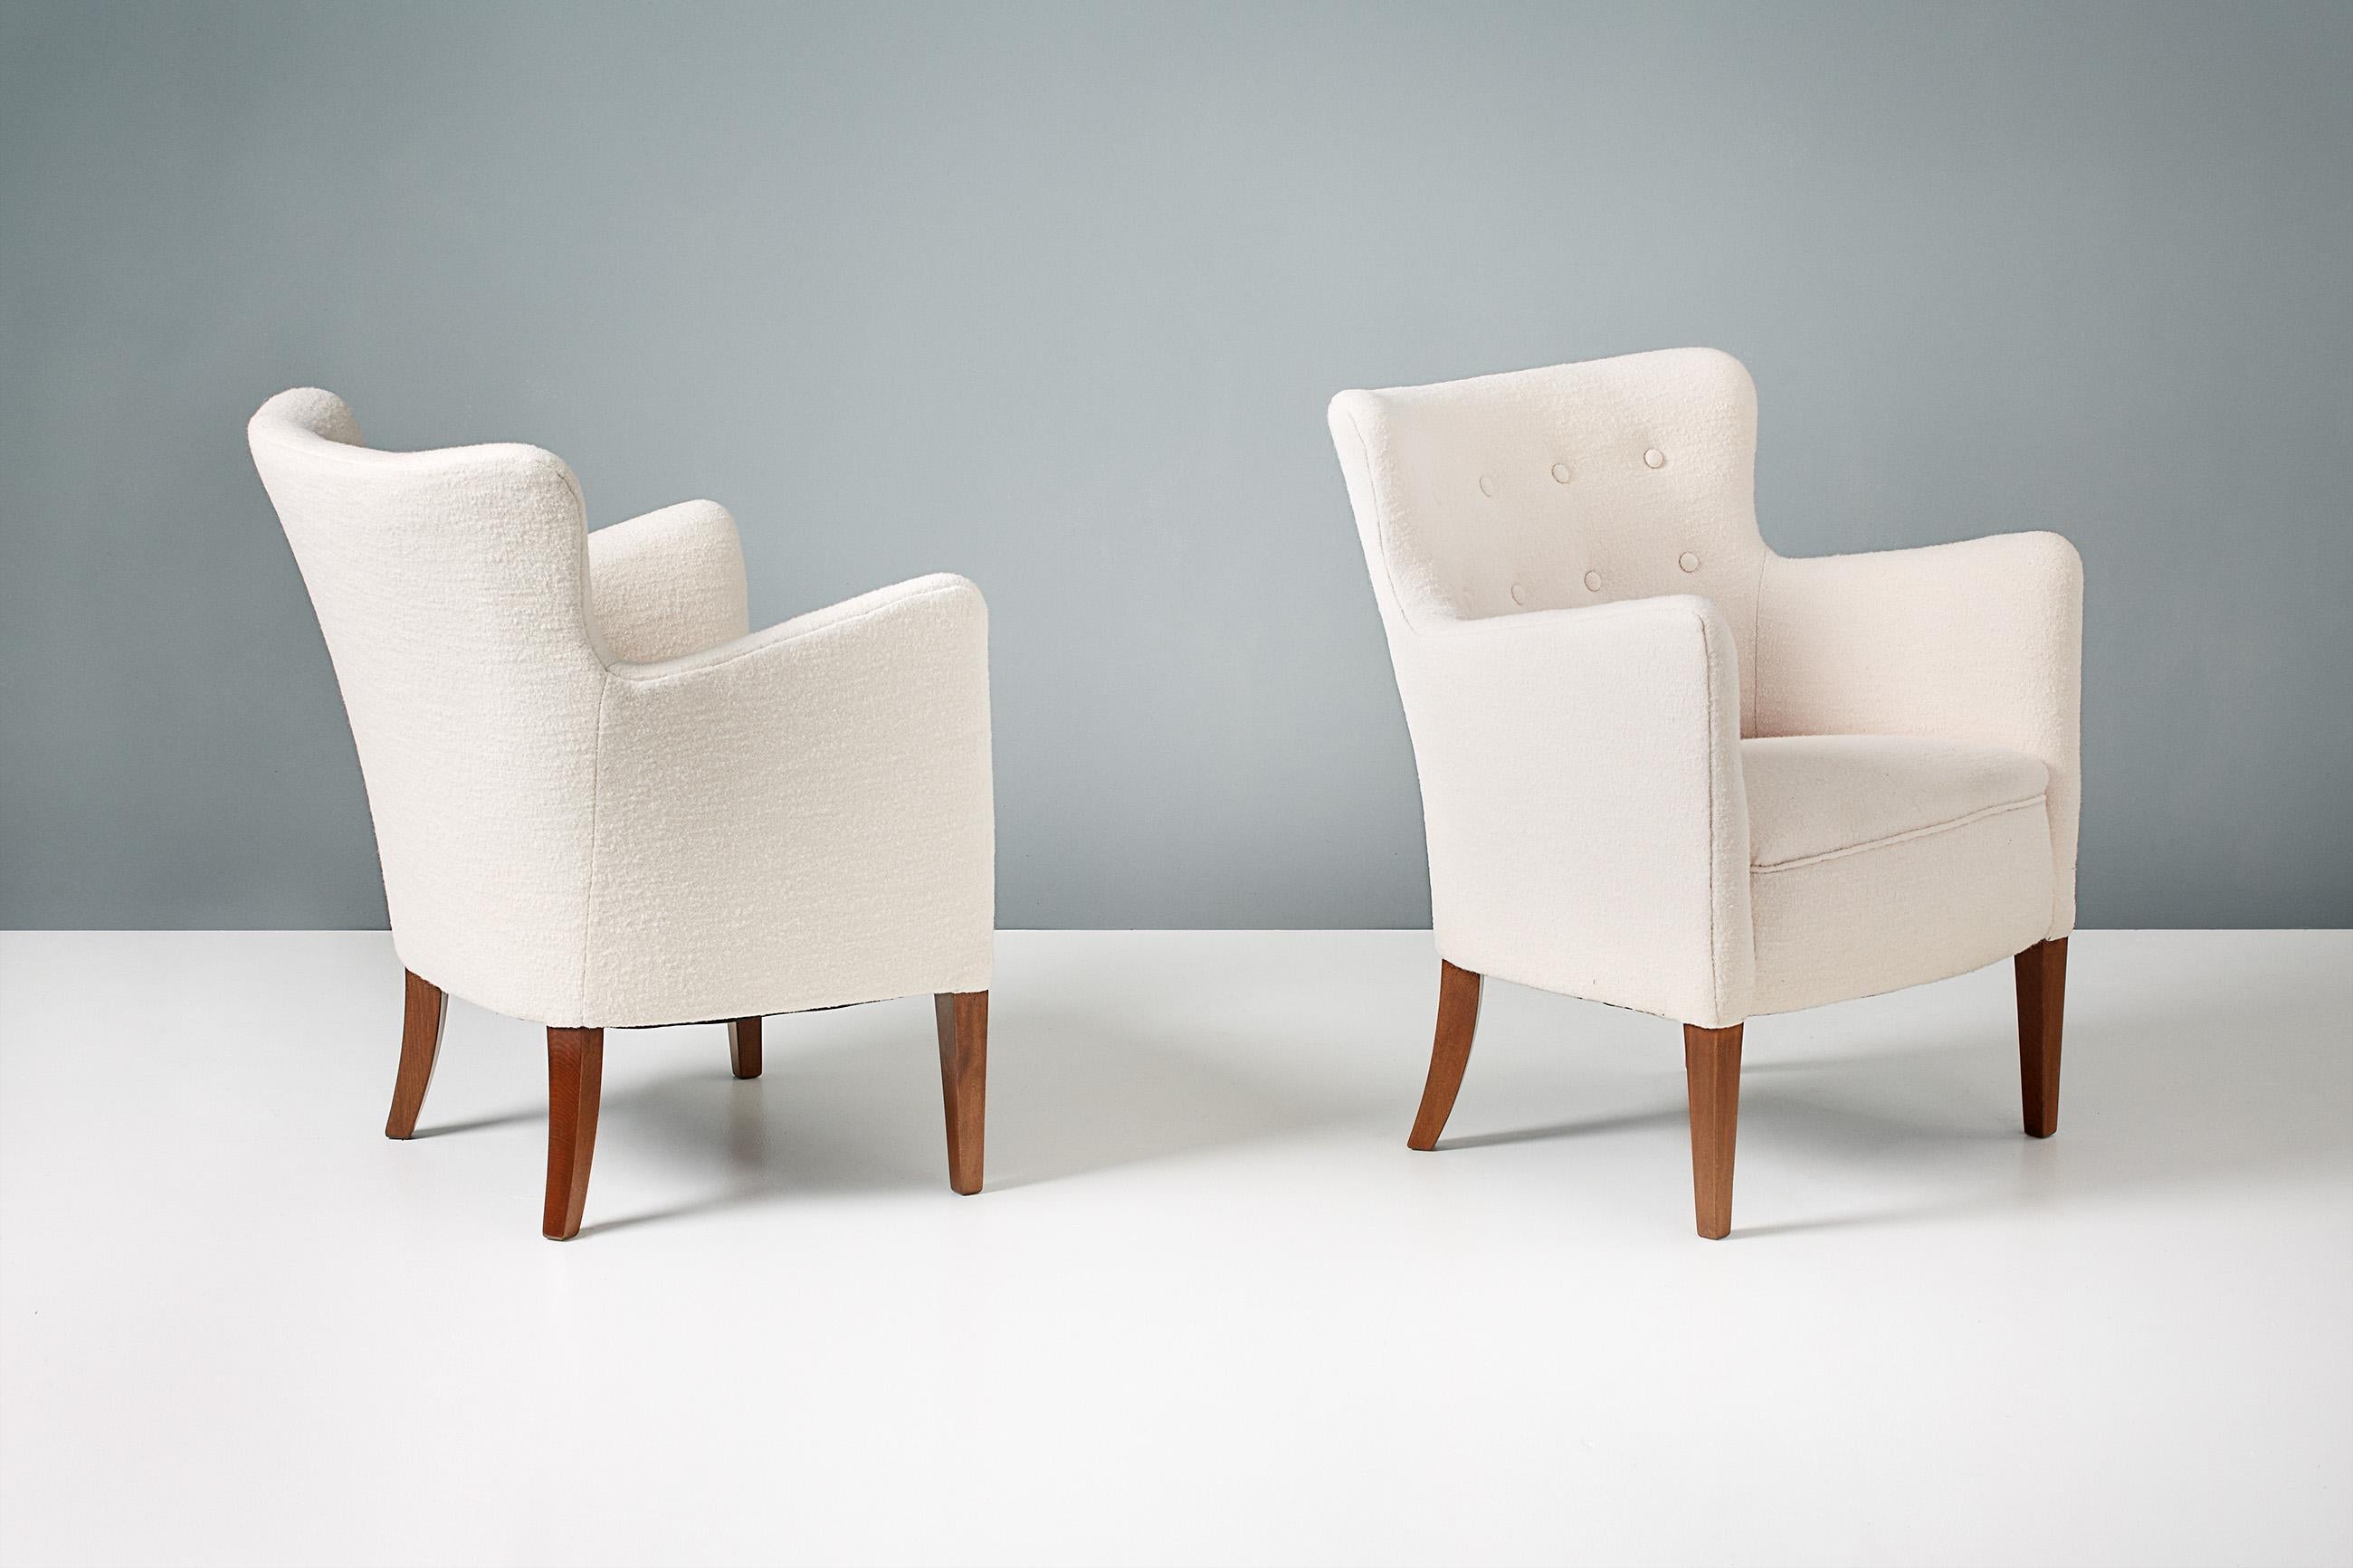 A pair of 1940s lounge chairs designed and made by master-cabinetmaker Jacob Kjaer. These examples have been reupholstered in off-white pure wool fabric from Chase Erwin in England. The legs are solid mahogany.

Each chair has been fully